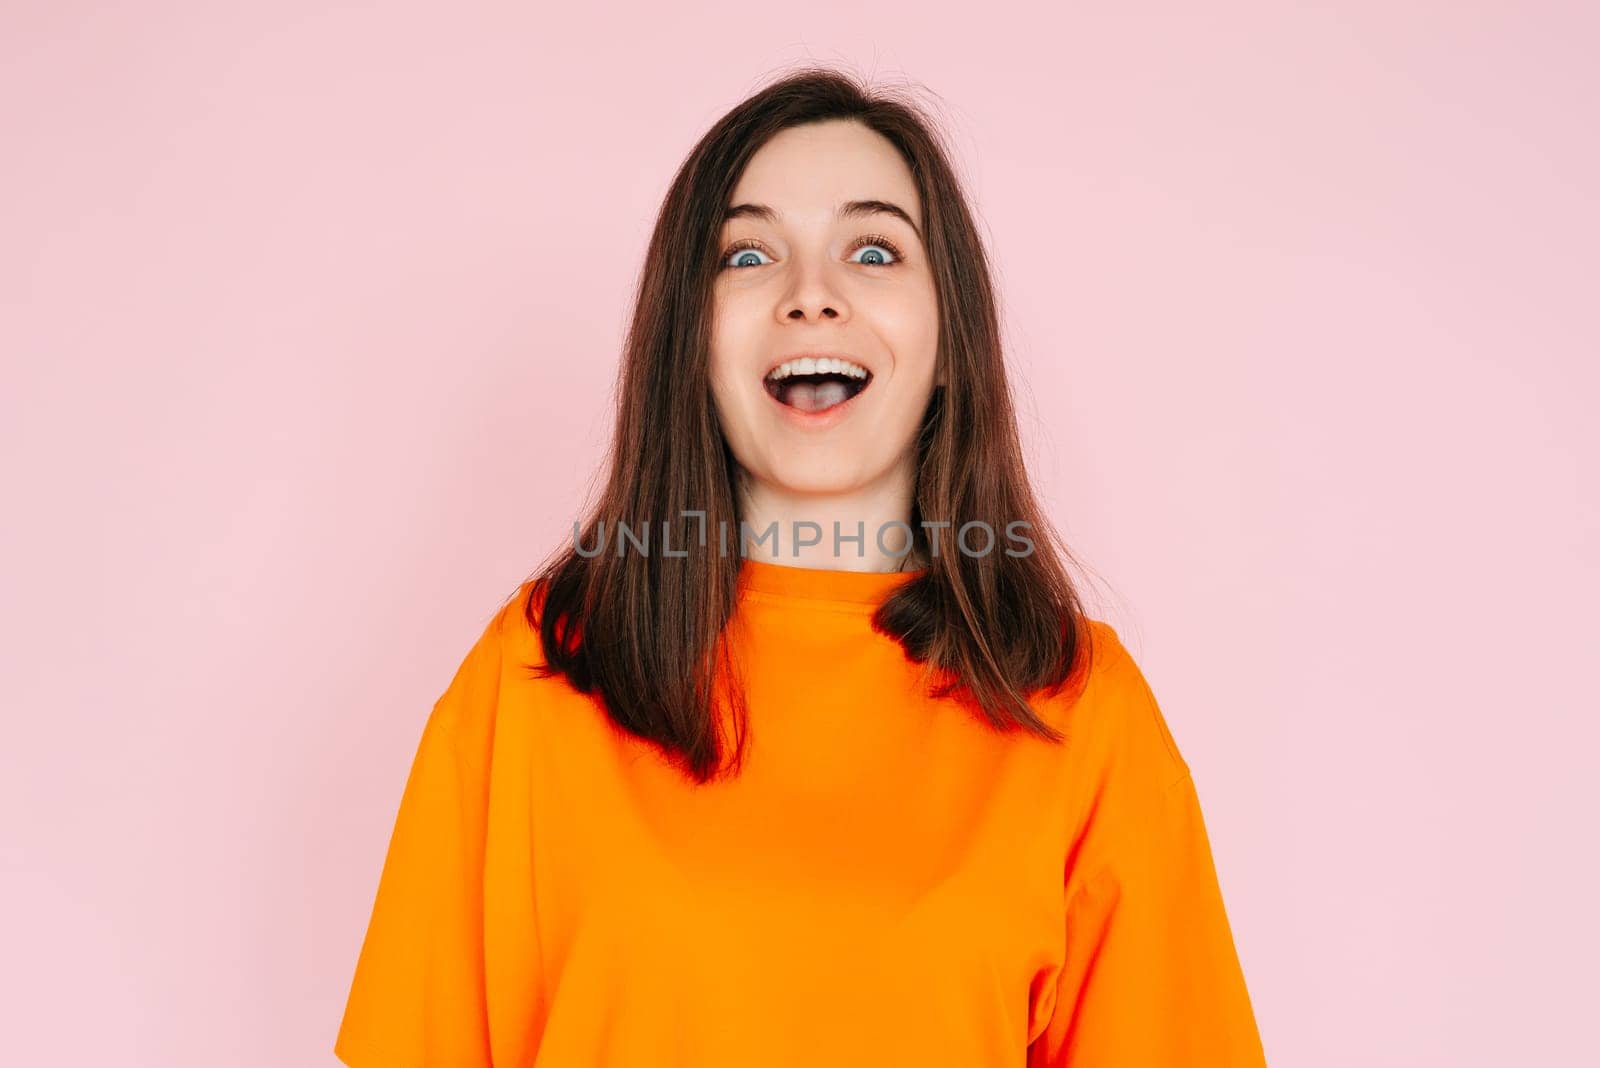 Energetic Expression: Impressed and Cheerful Woman with Open Mouth - Vibrant Emotion and Enthusiasm Captured on Pink Background